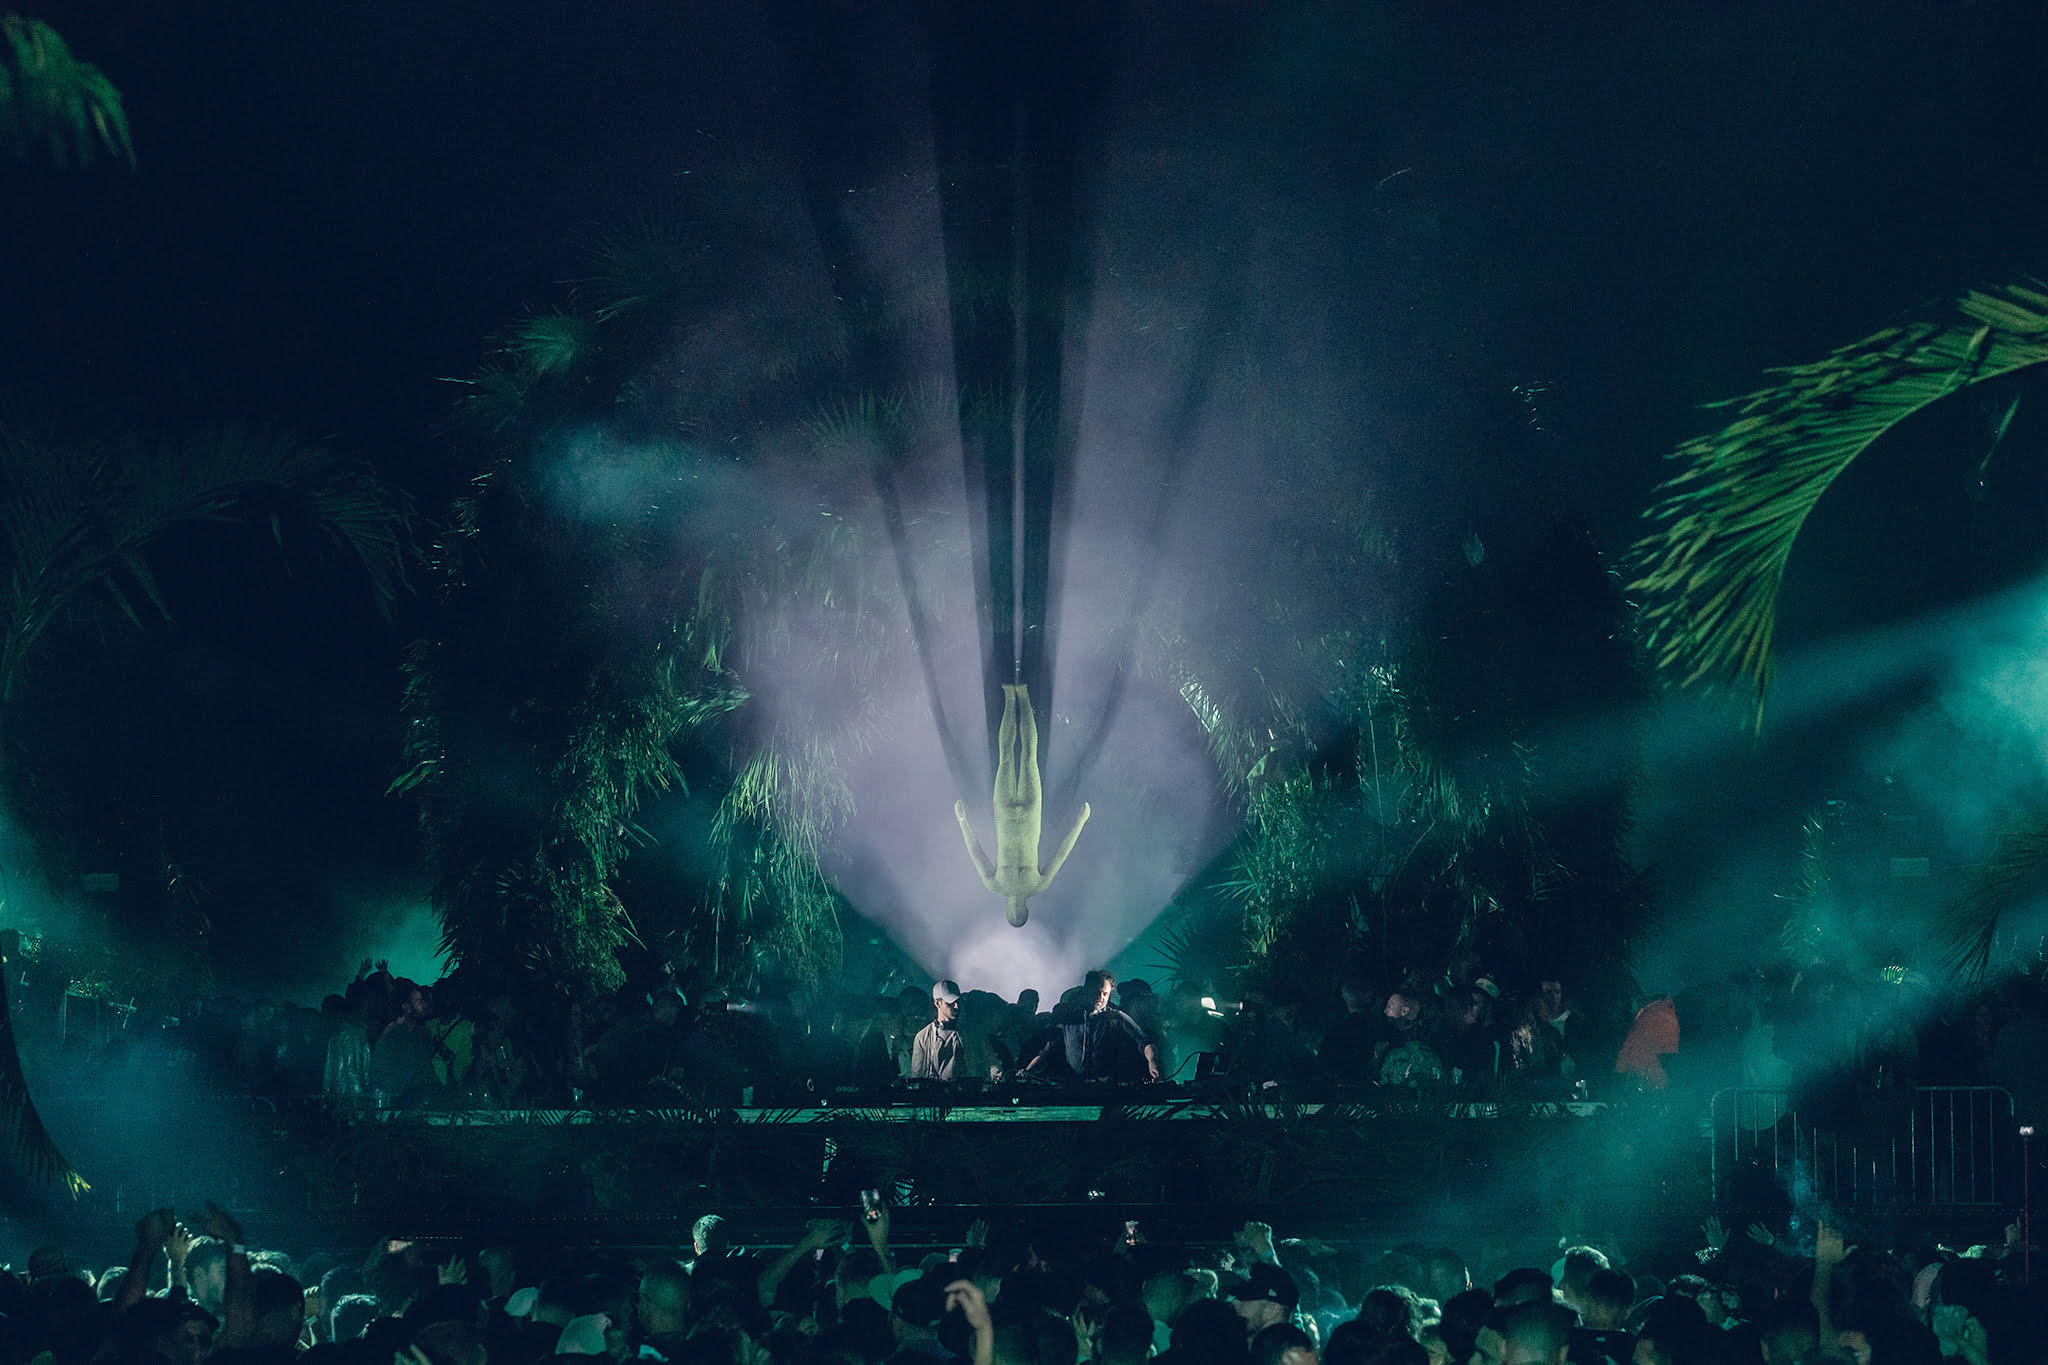 Tale Of Us reveals lineup for Afterlife Zamna Tulum 2022